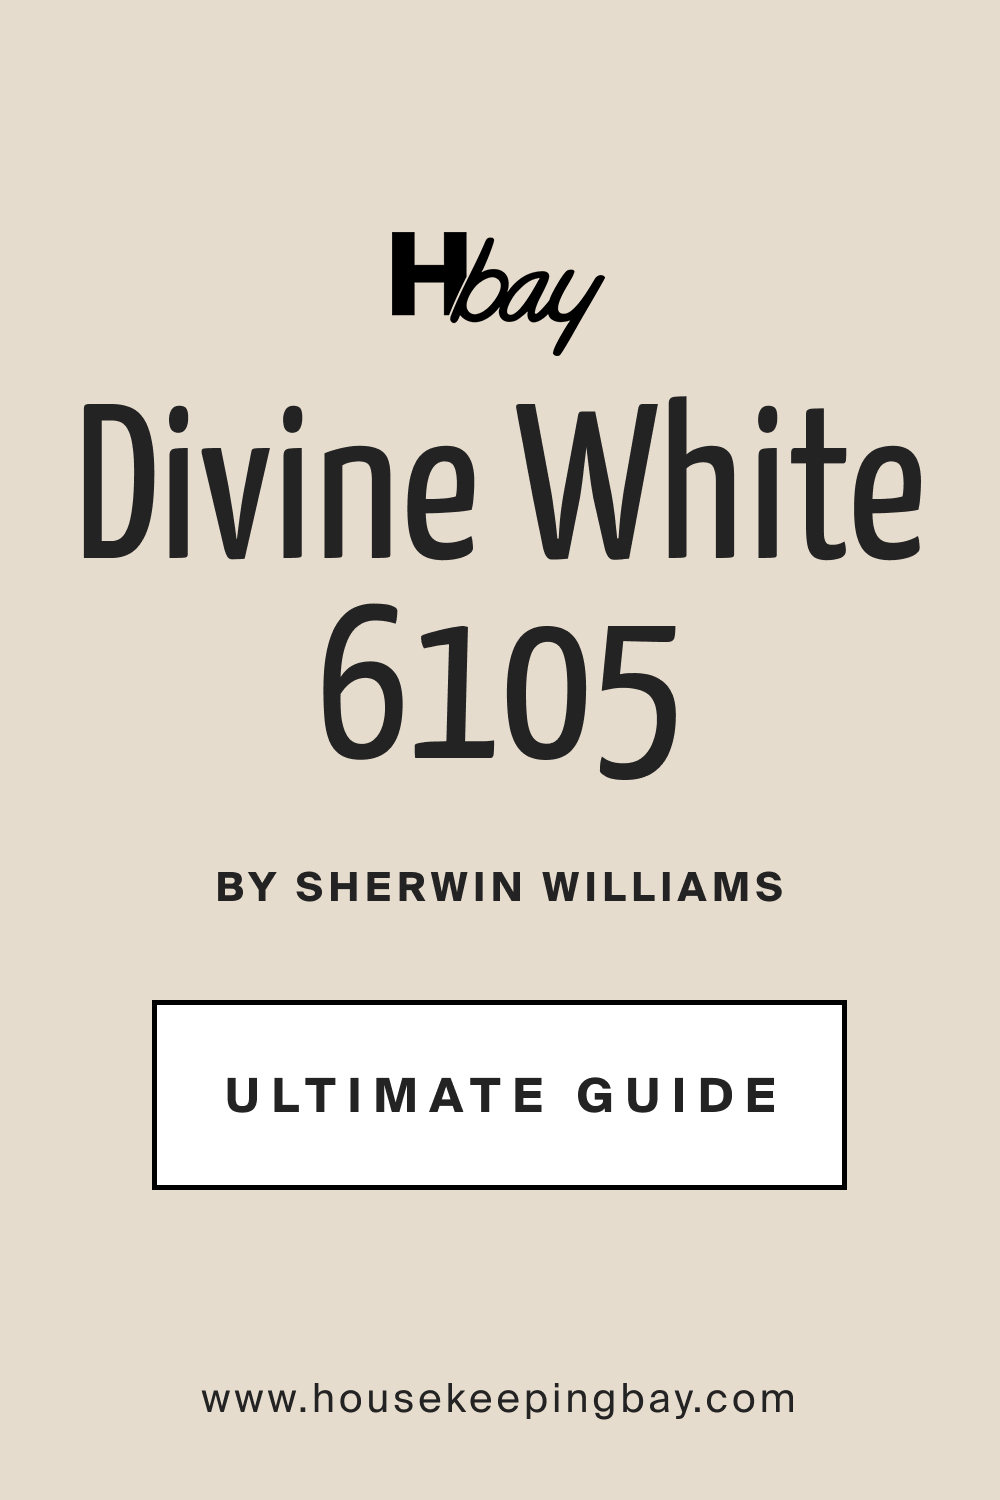 Divine White SW 6105 by Sherwin Williams Ultimate Guide